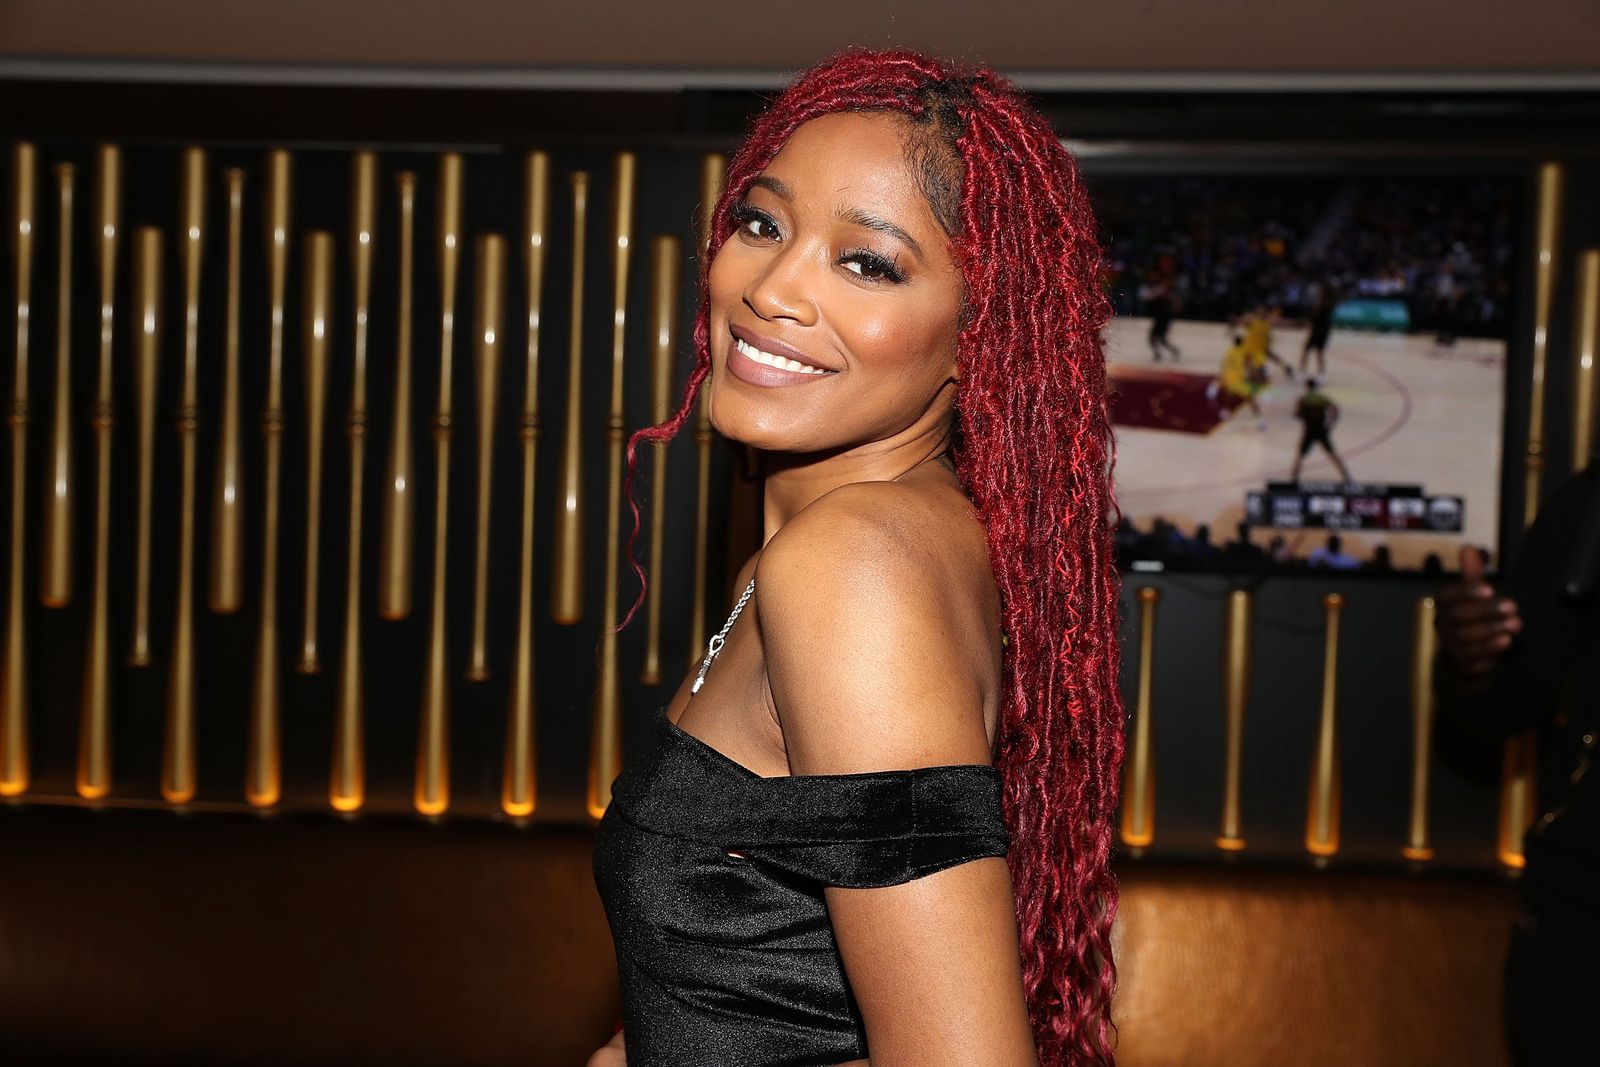 Actress Keke Palmer at her listening party at the 40/40 club in 2018. | Source: Getty Images